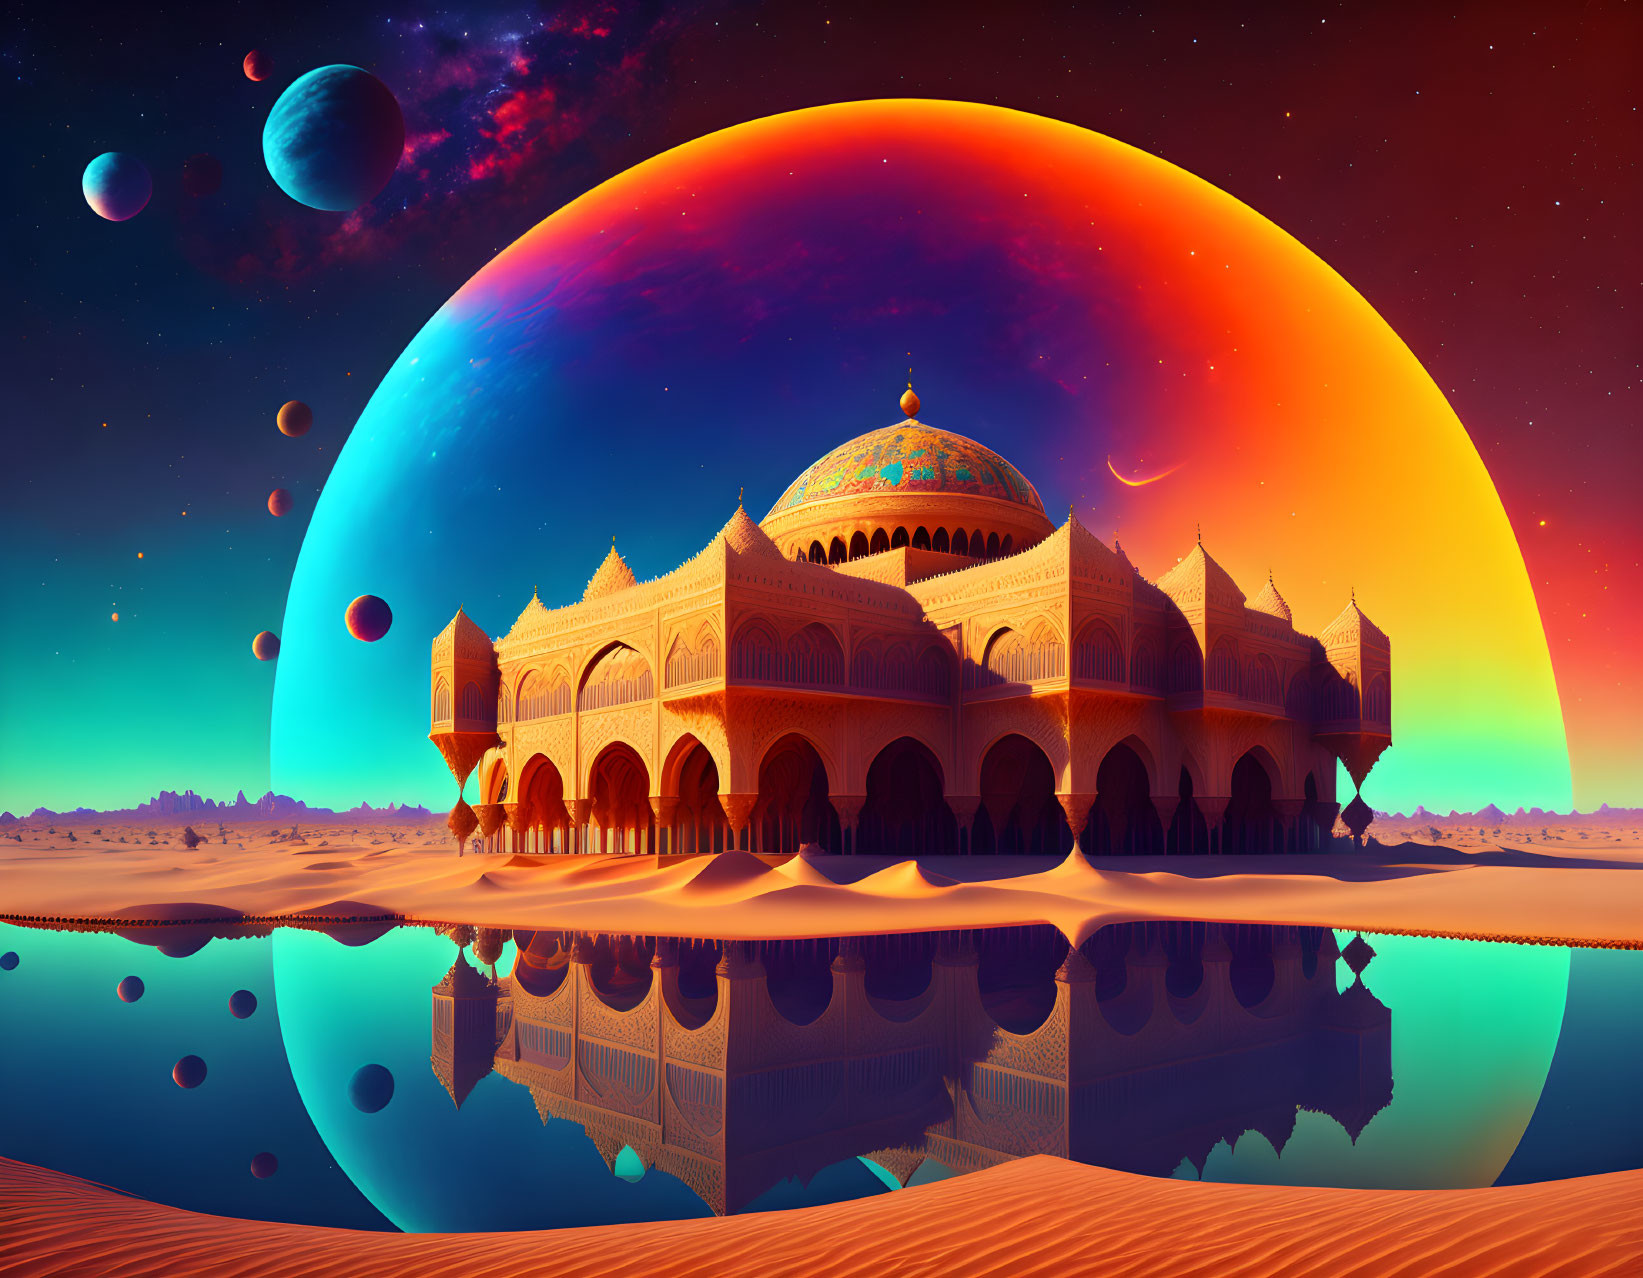 Fantasy landscape with domed palace, colorful skies, and celestial bodies.